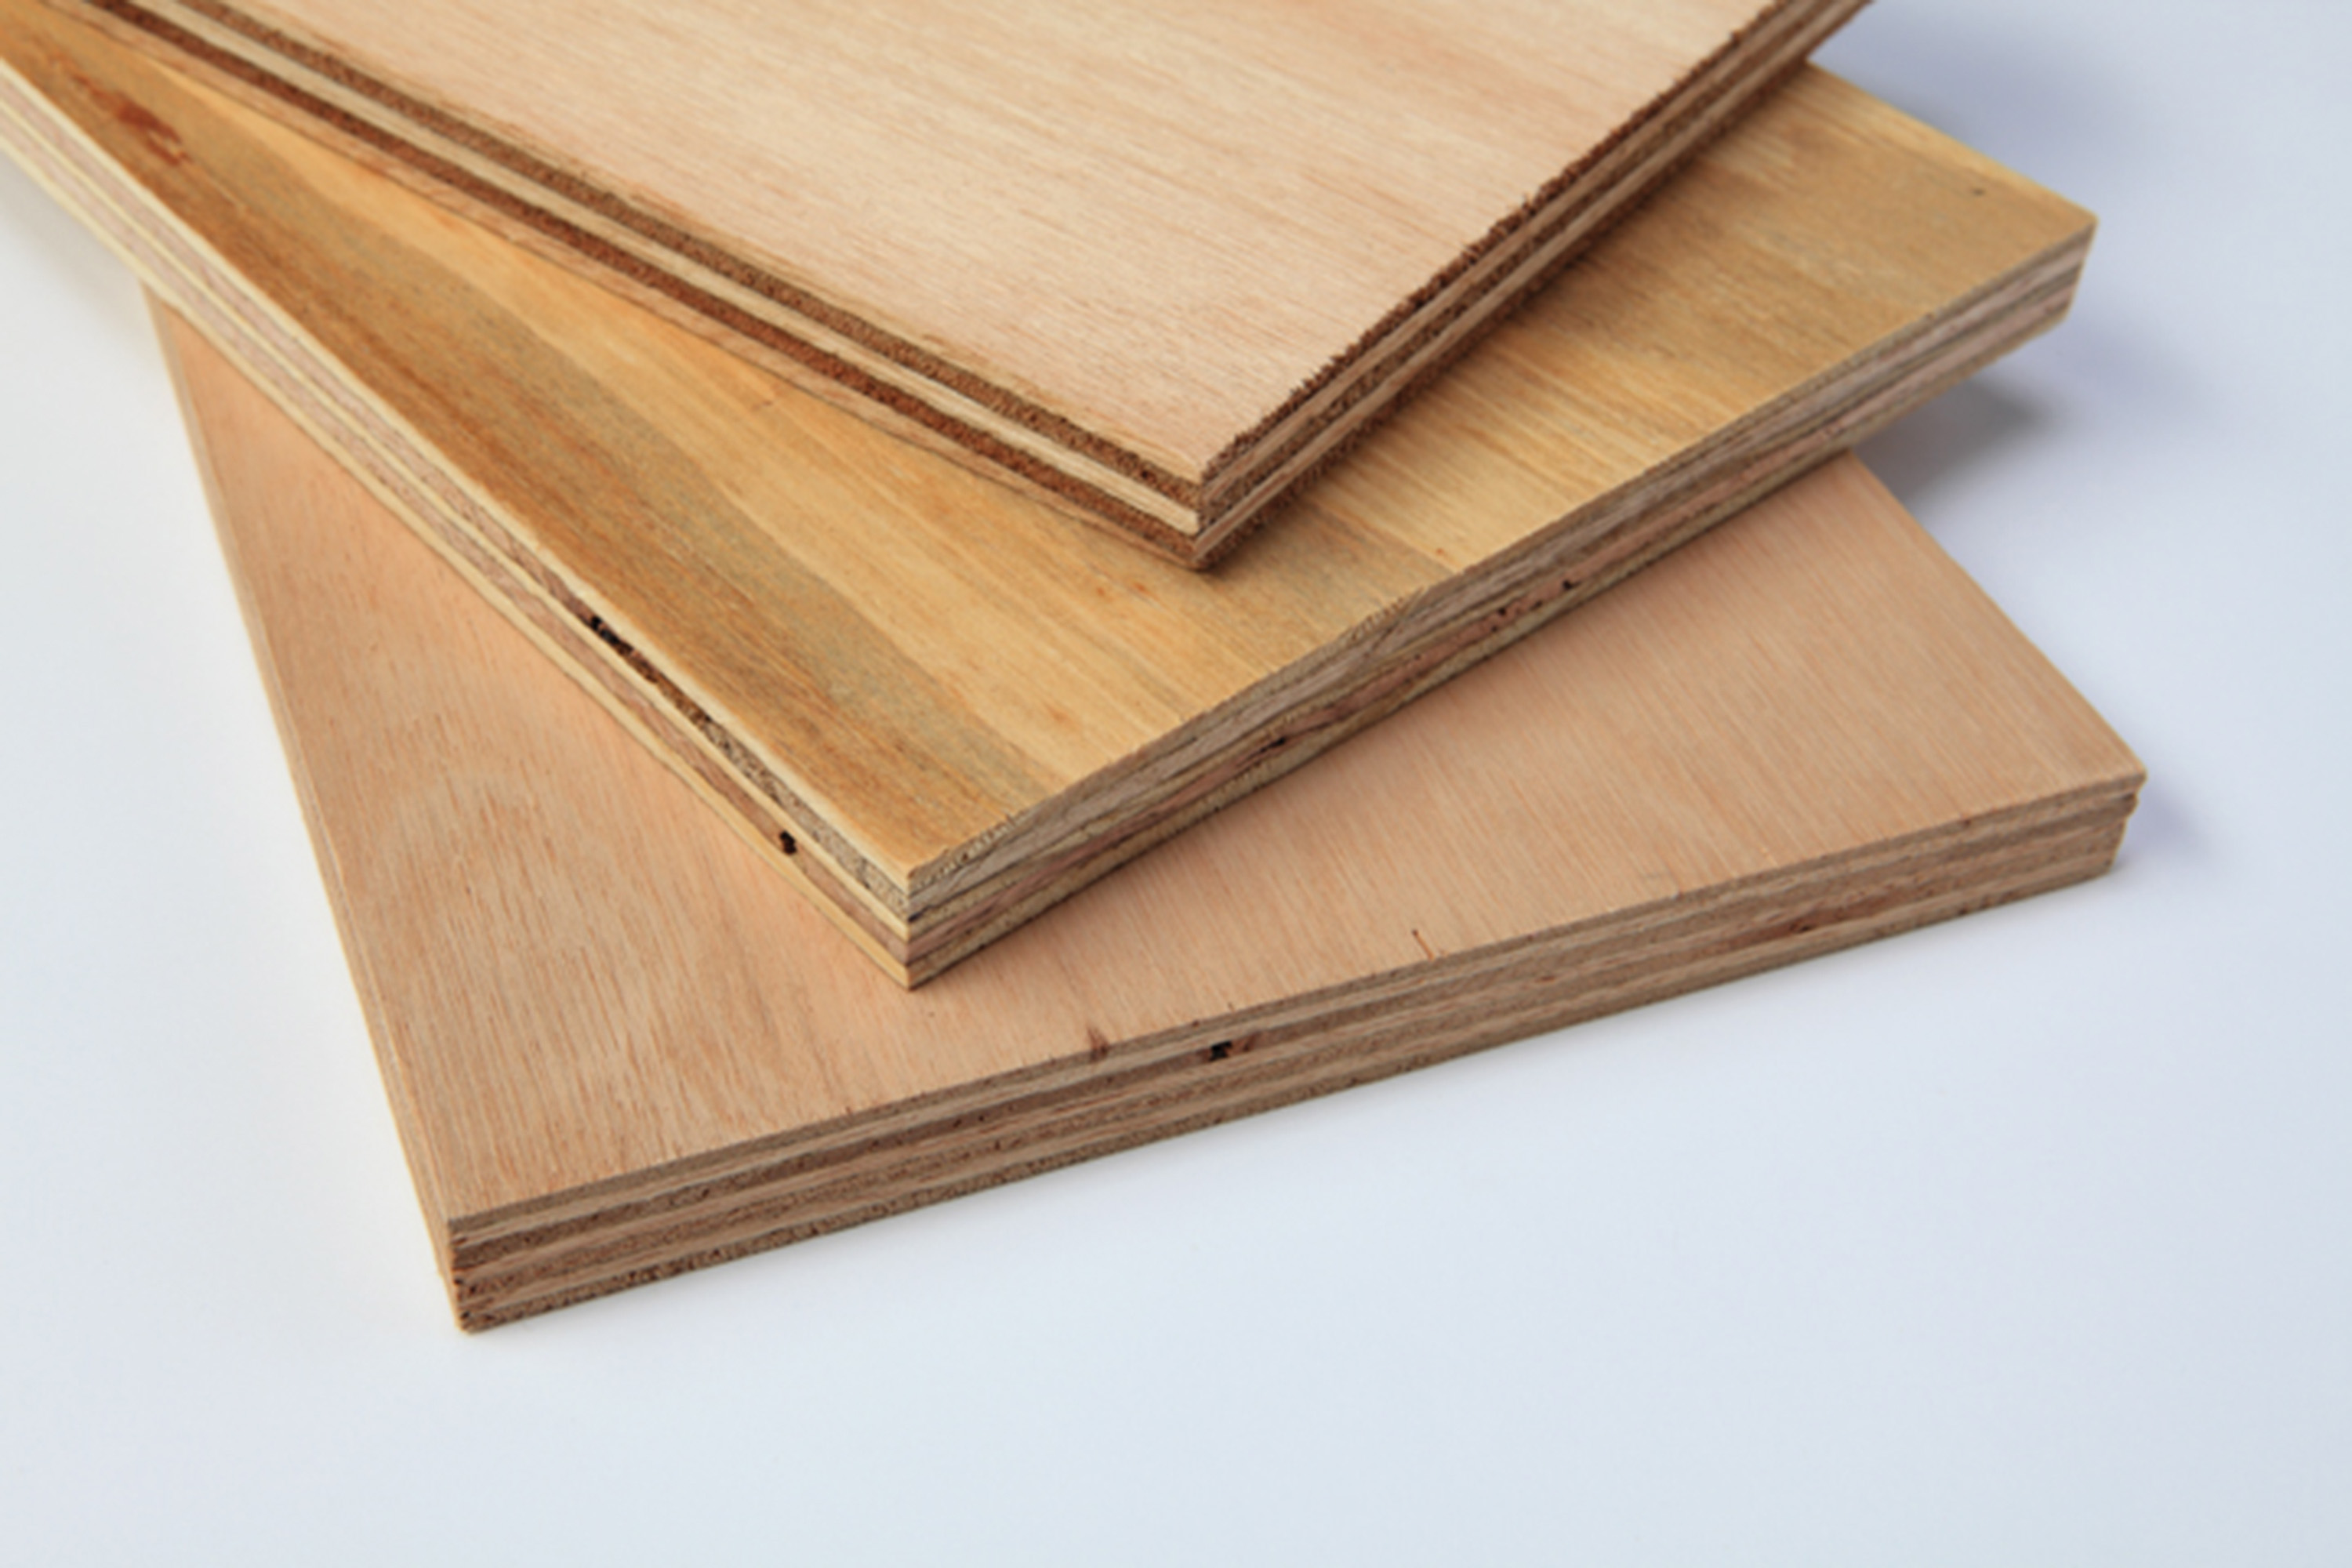 PRELAM TRADING CORPORATION, BEST PLYWOOD WHOLESALE DEALERS IN HYDERABAD,BEST PLYWOOD WHOLESALE DEALERS IN SECUNDERABAD,BEST PLYWOOD WHOLESALE DEALERS IN TELANGANA,BEST PLYWOOD WHOLESALE DEALERS IN KUKATPALLY.